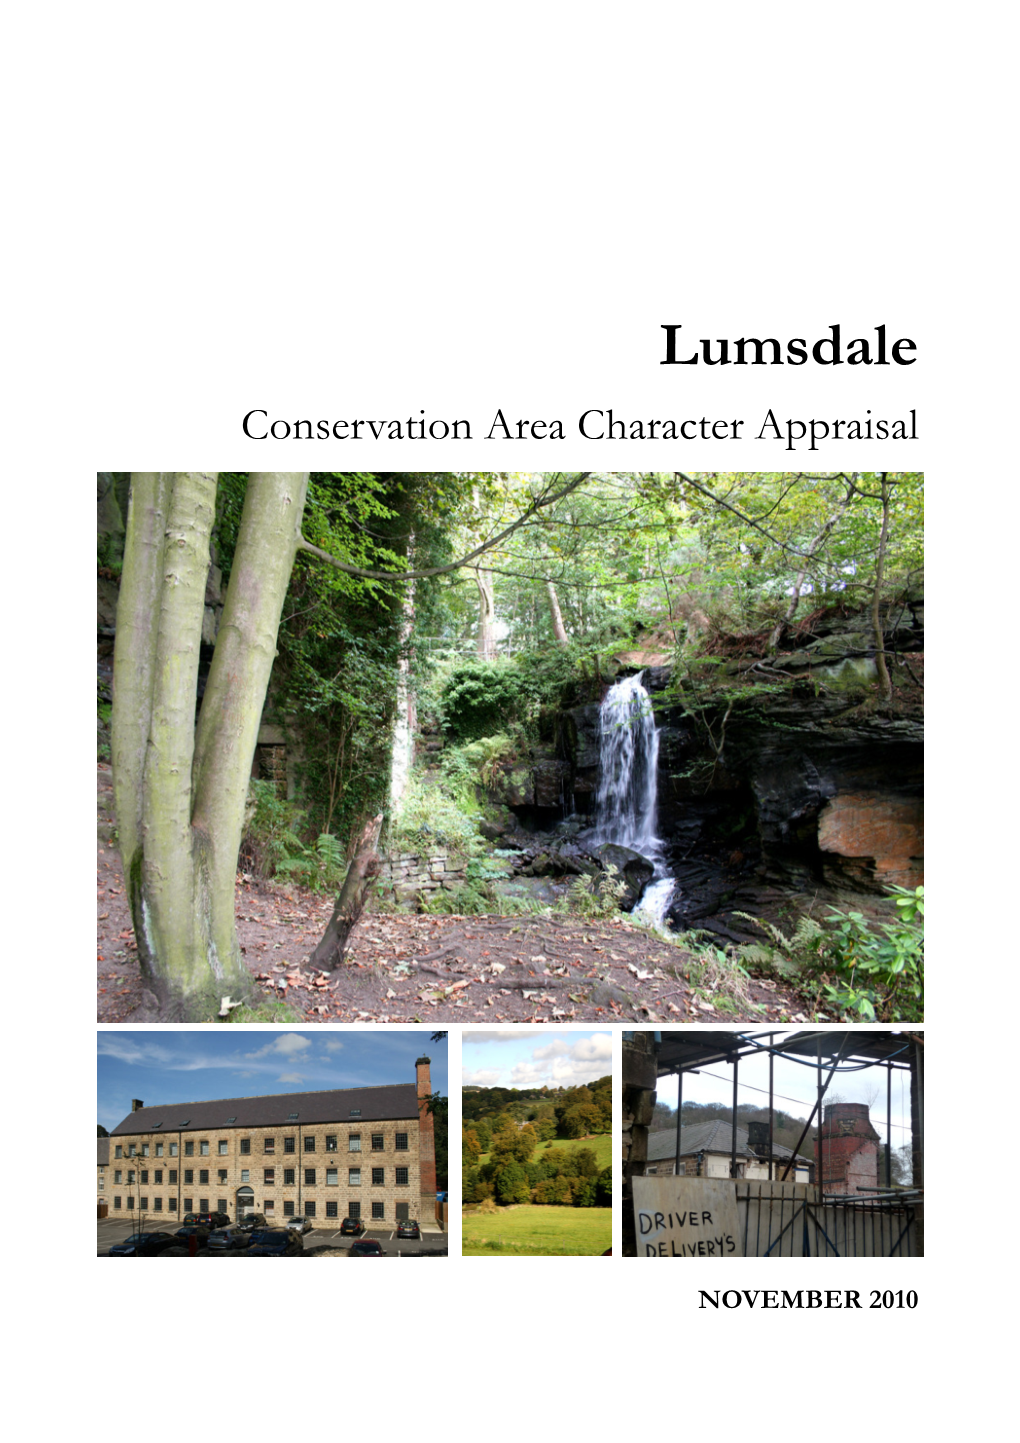 Lumsdale Conservation Area Character Appraisal